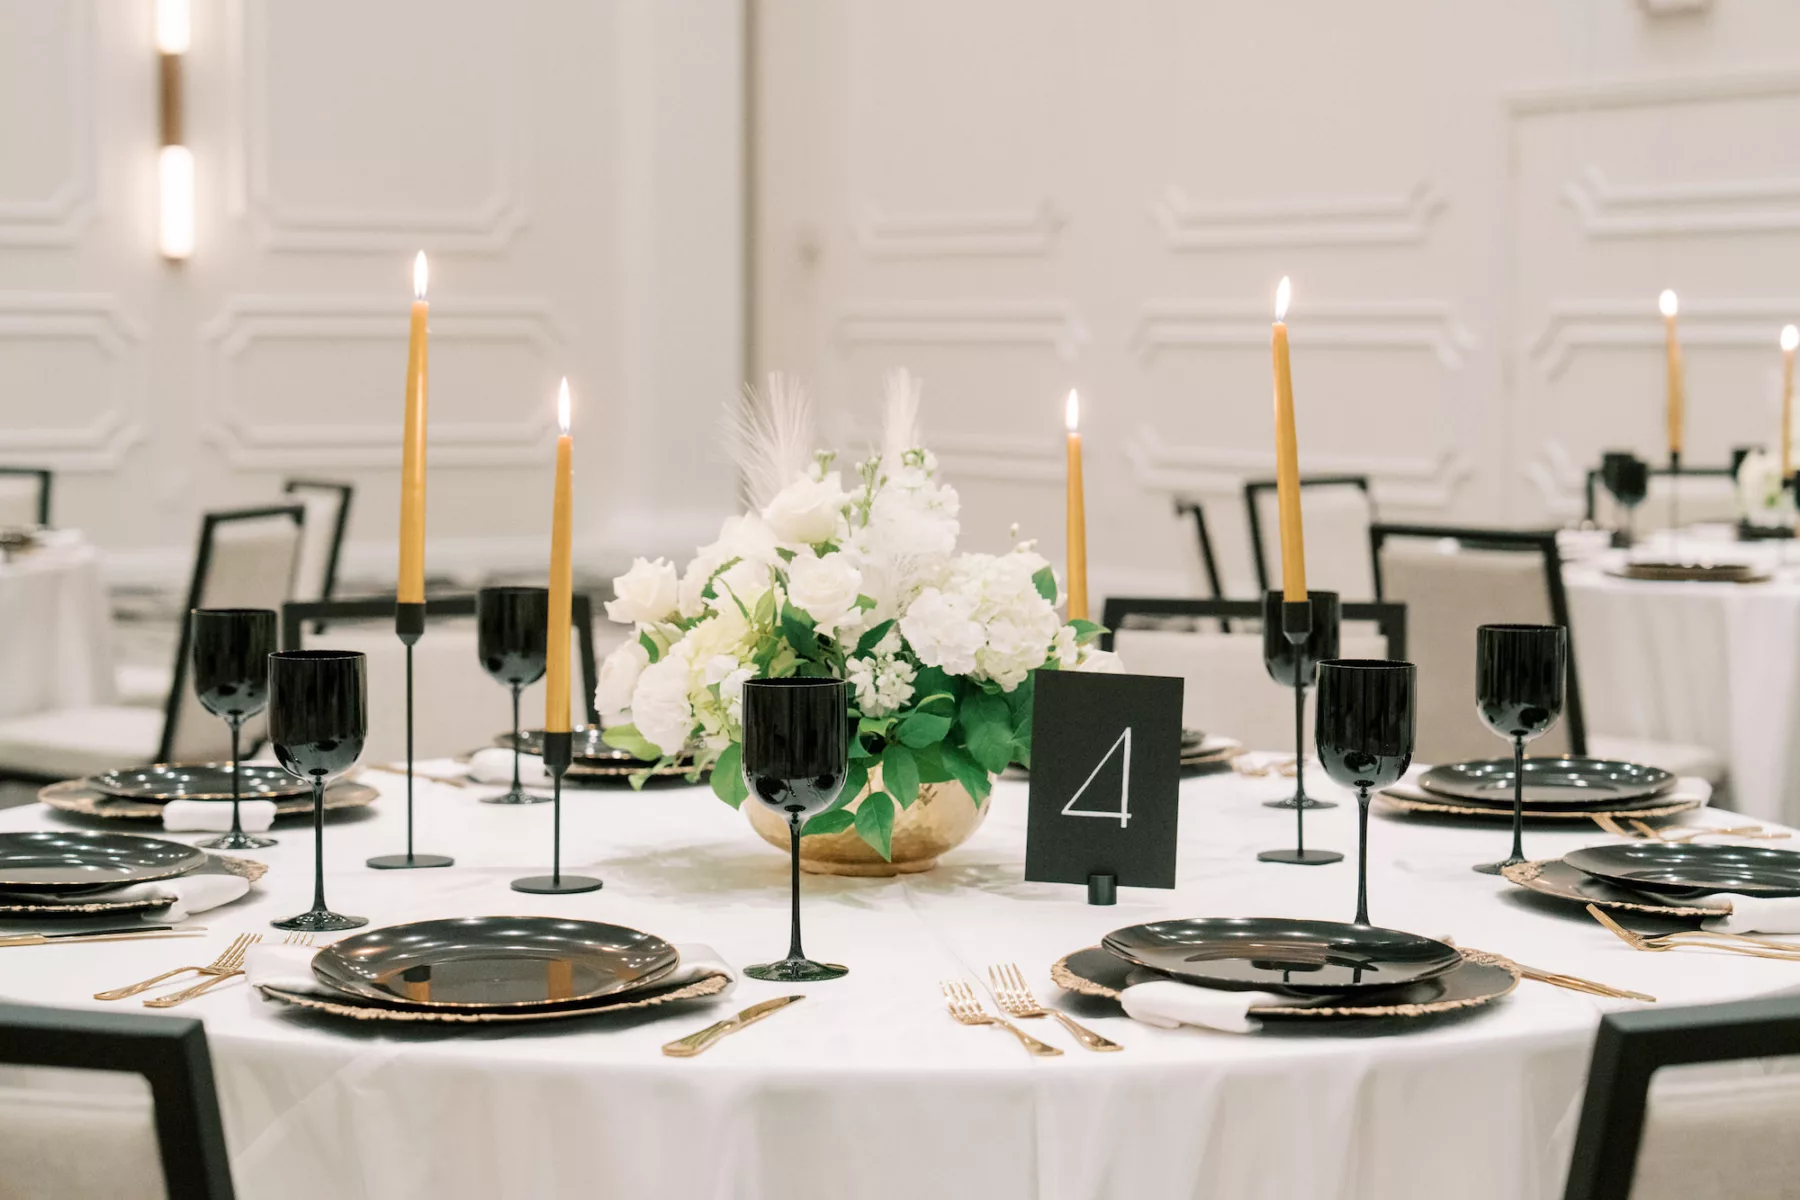 Modern Great Gatsby Inspired Wedding Reception Tablescape Ideas | Black and Gold Vintage Chargers | Gold Flatware and Taper Candles | Sleek Black Wine Glasses | White Roses, Hydrangeas, Stock Flowers, and Feathers Centerpiece Inspiration | Tampa Bay Outside The Box Rentals